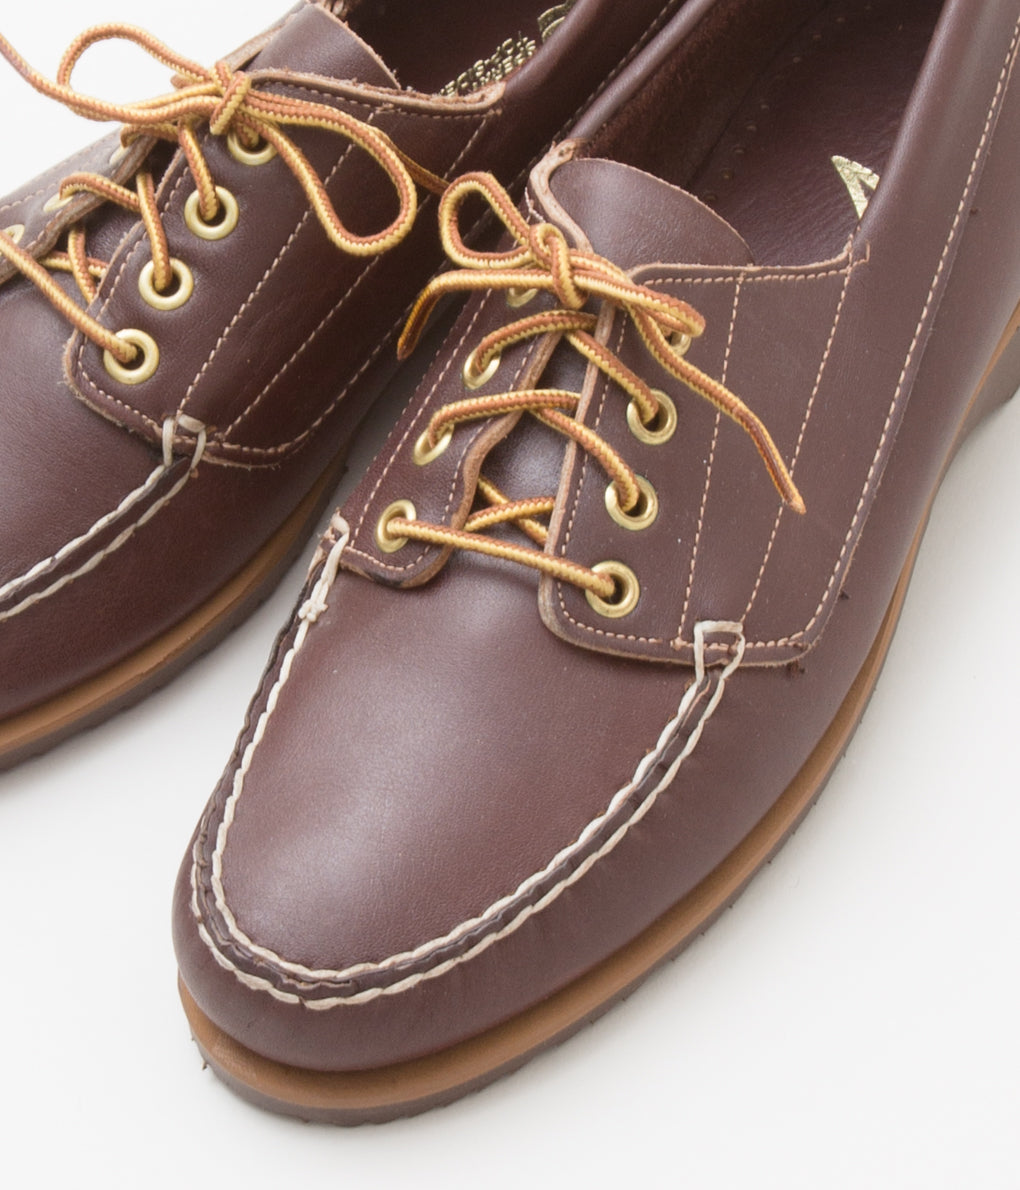 FROM USA "VINTAGE SPERRY TOP-SIDER RANGER MOC"(BROWN)